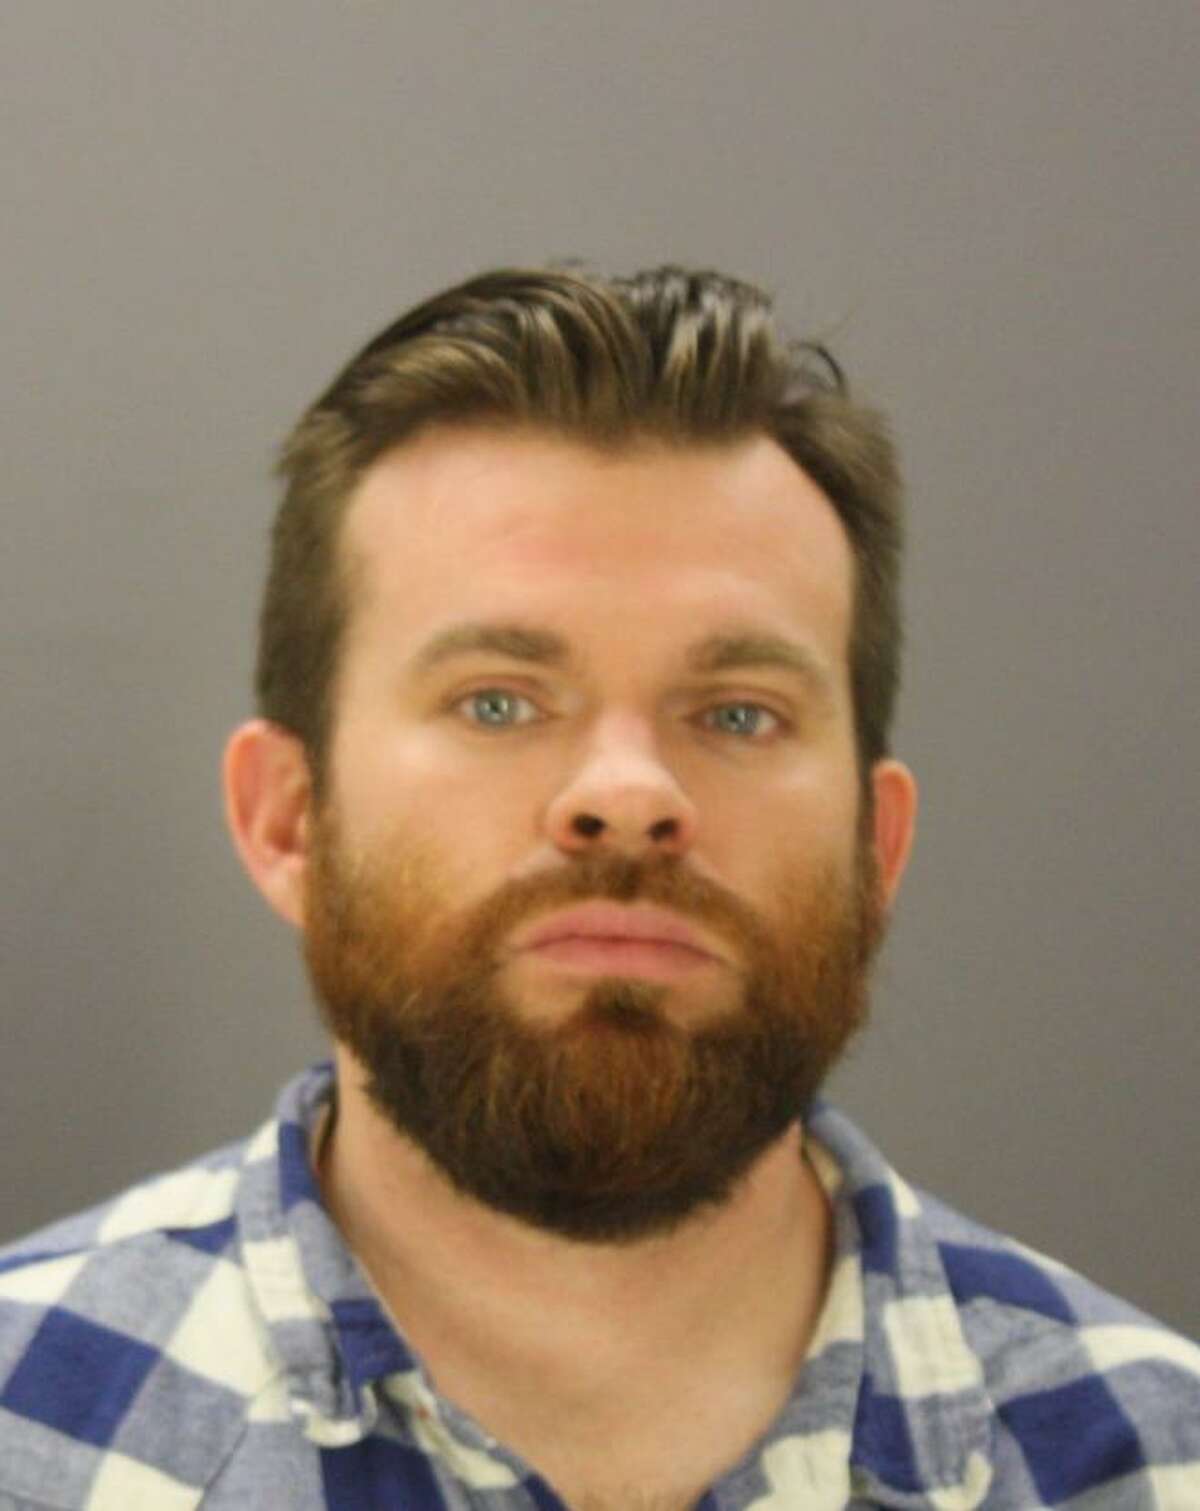 A North Texas teacher could face up to 40 years in prison if convicted on charges that he had allegedly sex with a 16-year-old female student, who he offered good grades in exchange for keeping the contact secret from his wife. James Lester Quigley, a 34-year-old teacher at Richardson High School, has been charged with one count of improper relationship between an educator and student and one count of sexual assault. Both charges are second degree felonies, each punishable by up to 20 years in prison.